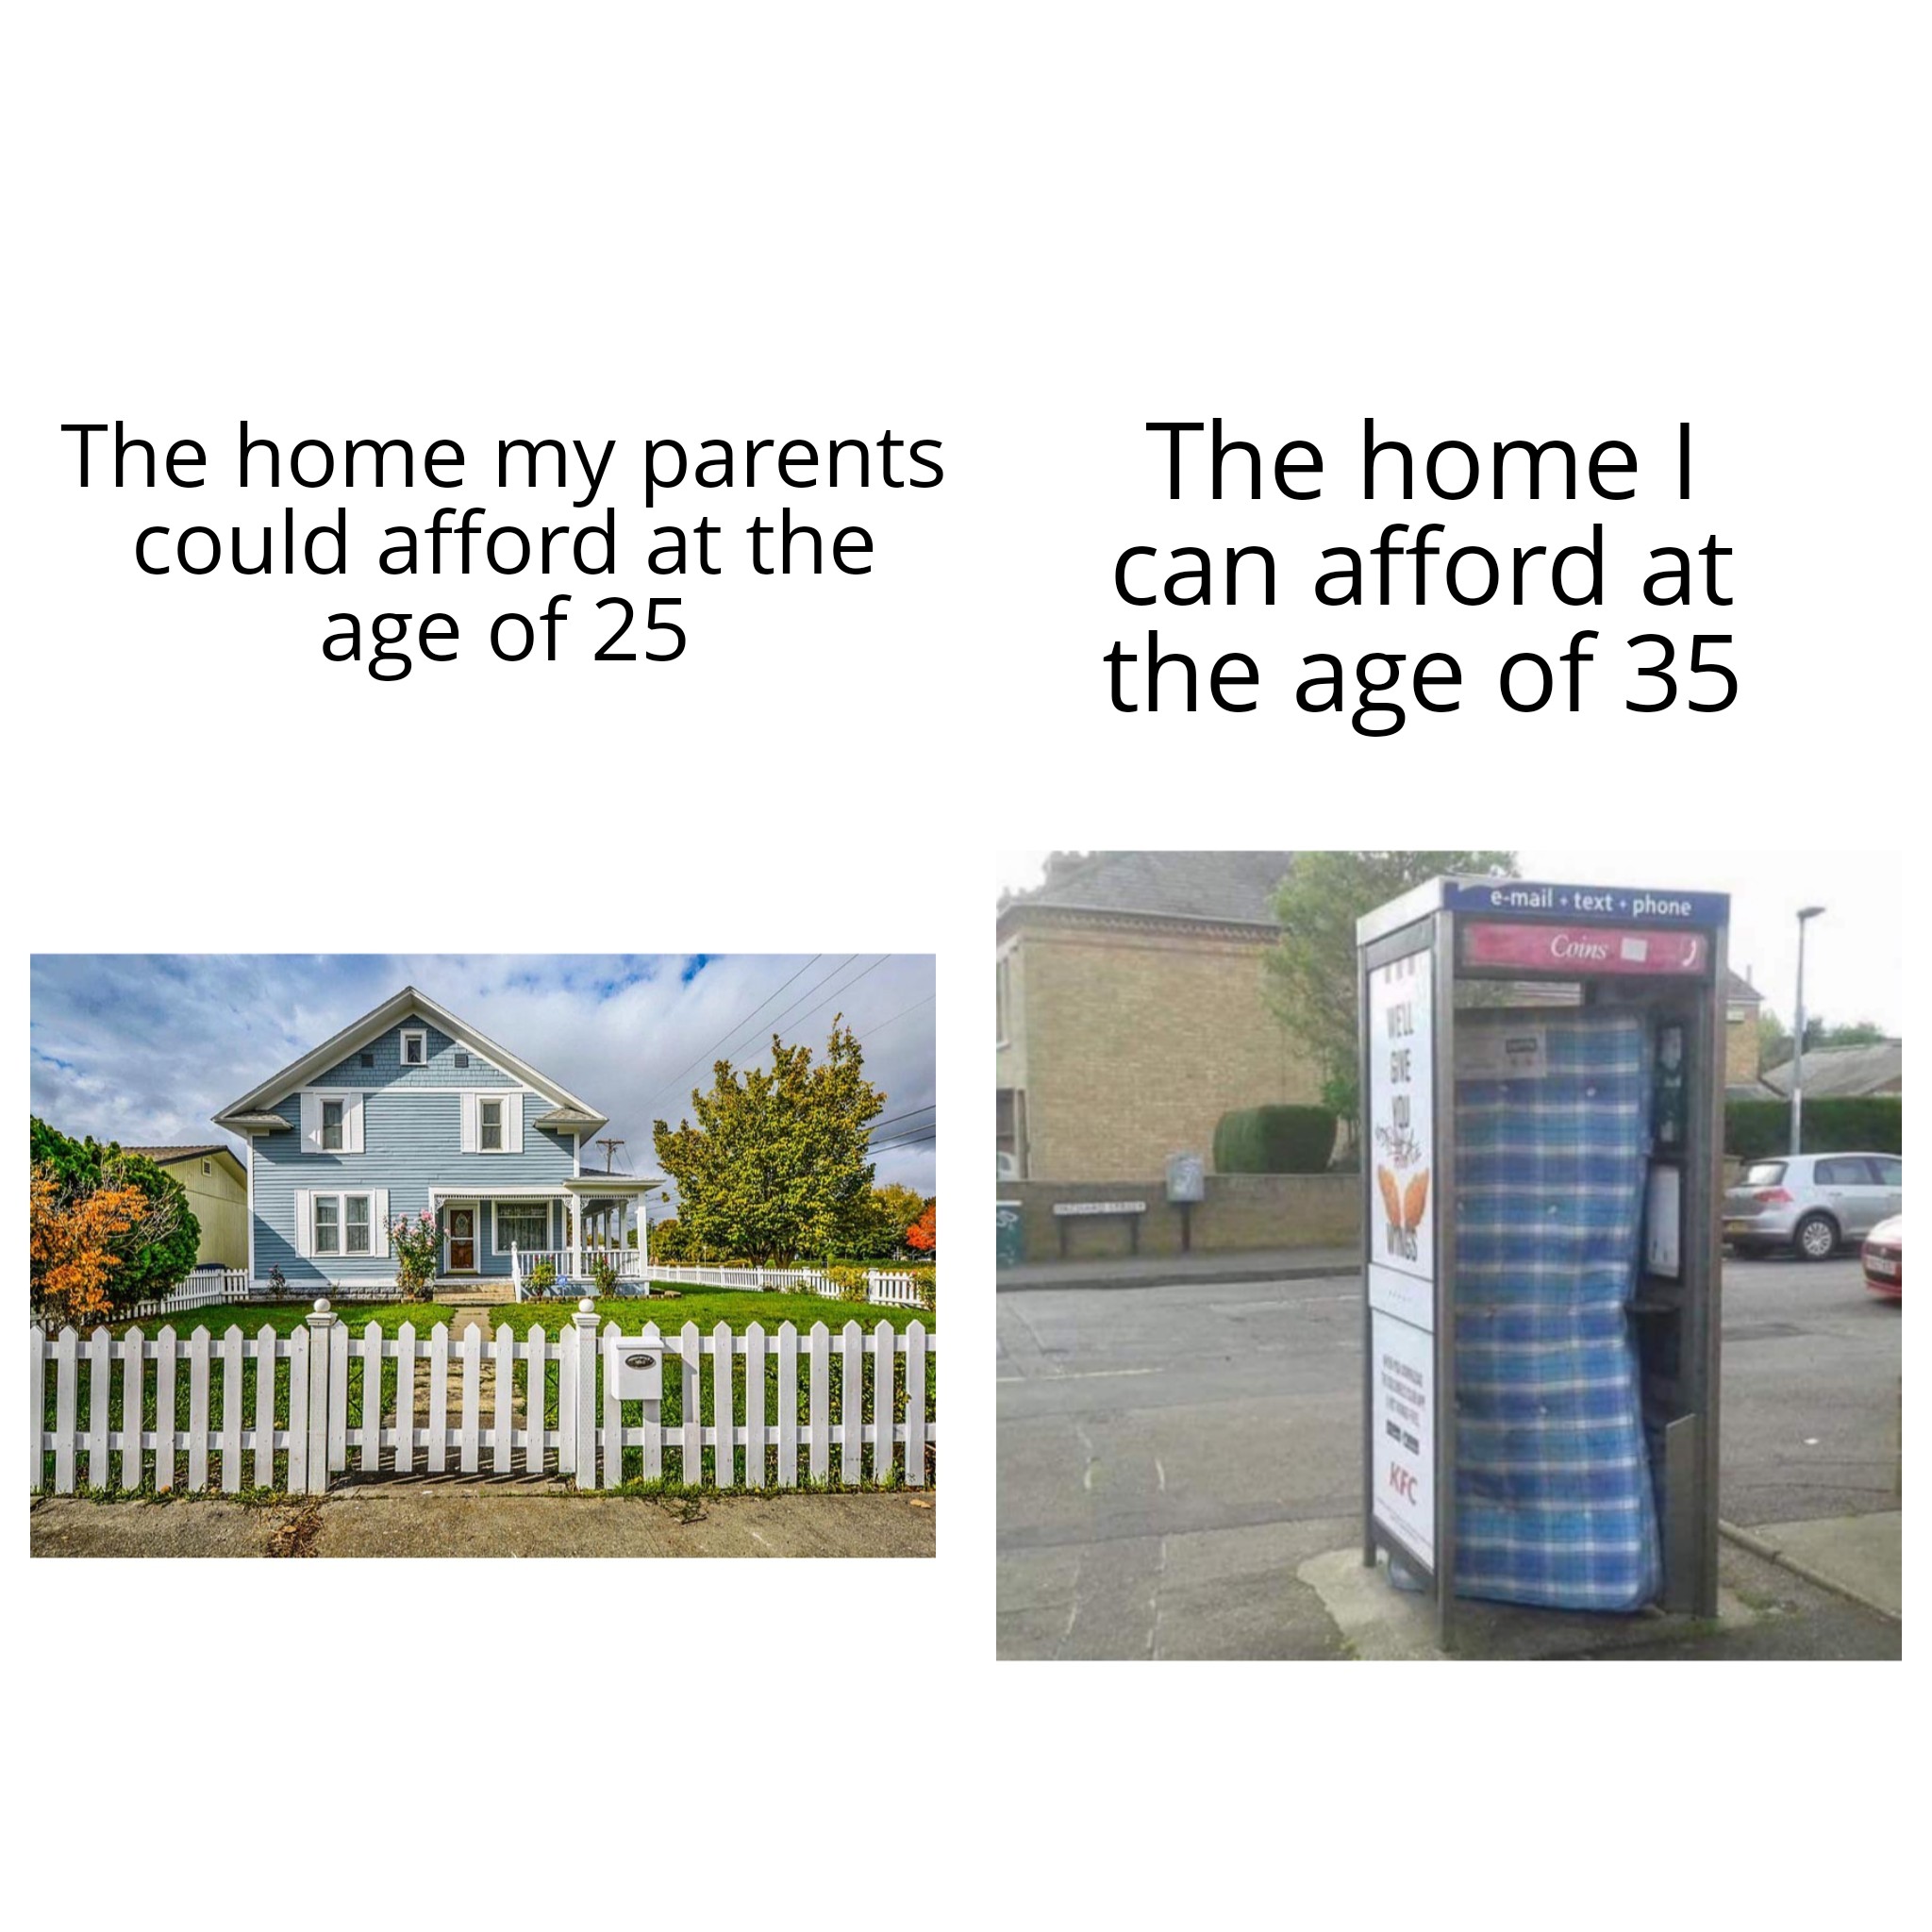 funny memes - architecture - The home my parents could afford at the age of 25 I The home l can afford at the age of 35